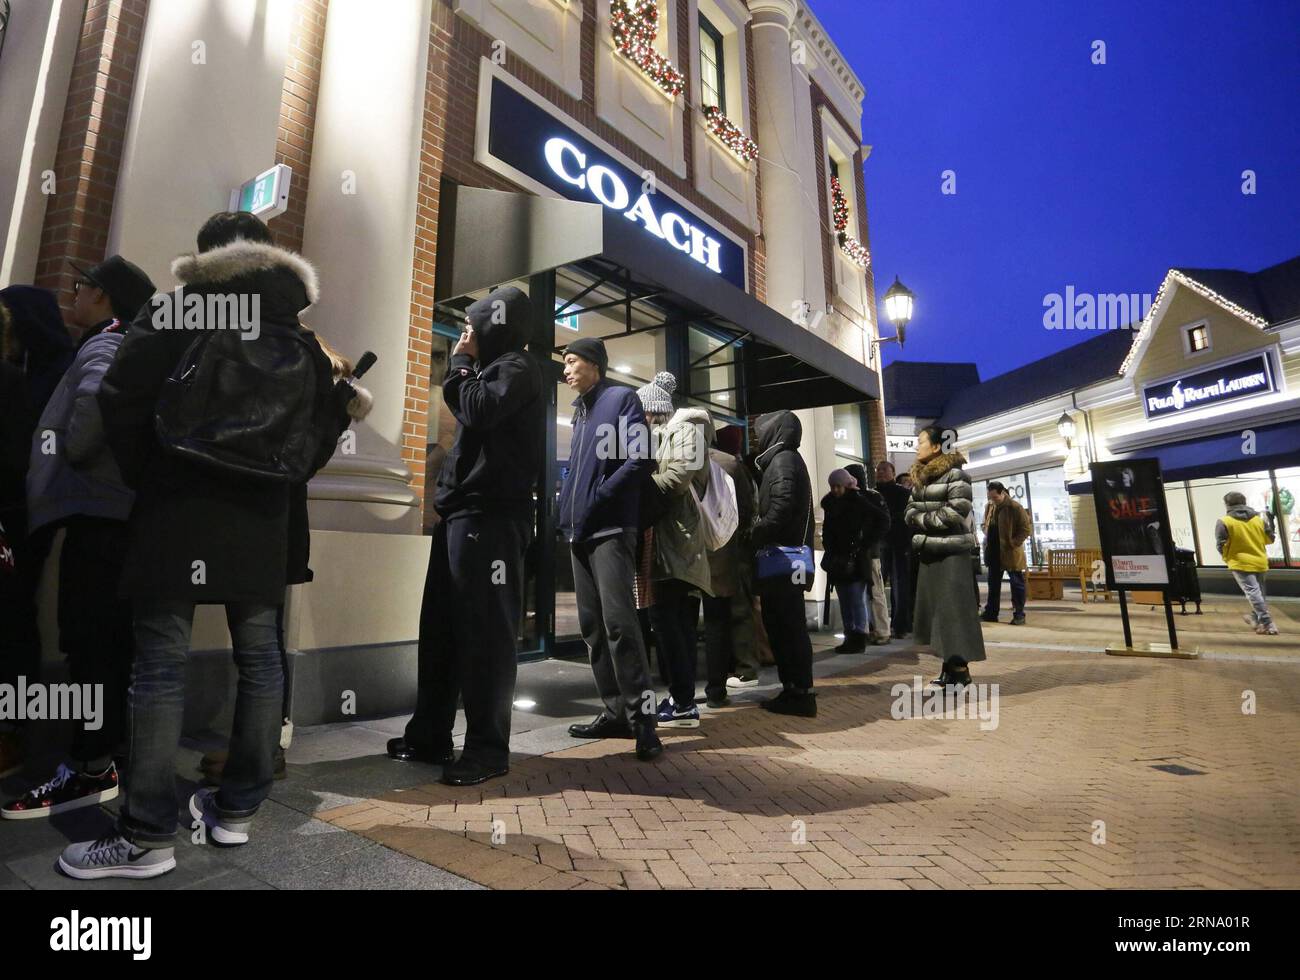 (151226) -- VANCOUVER, Dec. 26, 2015 -- Crowds are seen in front of a store during Boxing Day sales in Vancouver, Canada, Dec. 26, 2015. Boxing Day is the busiest and biggest shopping day in Canada. Retail outlets offer great bargain sale prices to attract thousands of post-Christmas shoppers. ) CANADA-VANCOUVER-BOXING DAY-SHOPPING LiangxSen PUBLICATIONxNOTxINxCHN   151226 Vancouver DEC 26 2015 Crowds are Lakes in Front of a Store during Boxing Day Sales in Vancouver Canada DEC 26 2015 Boxing Day IS The busiest and Biggest Shopping Day in Canada Retail Outlets OFFER Great Bargain Sale Prices t Stock Photo